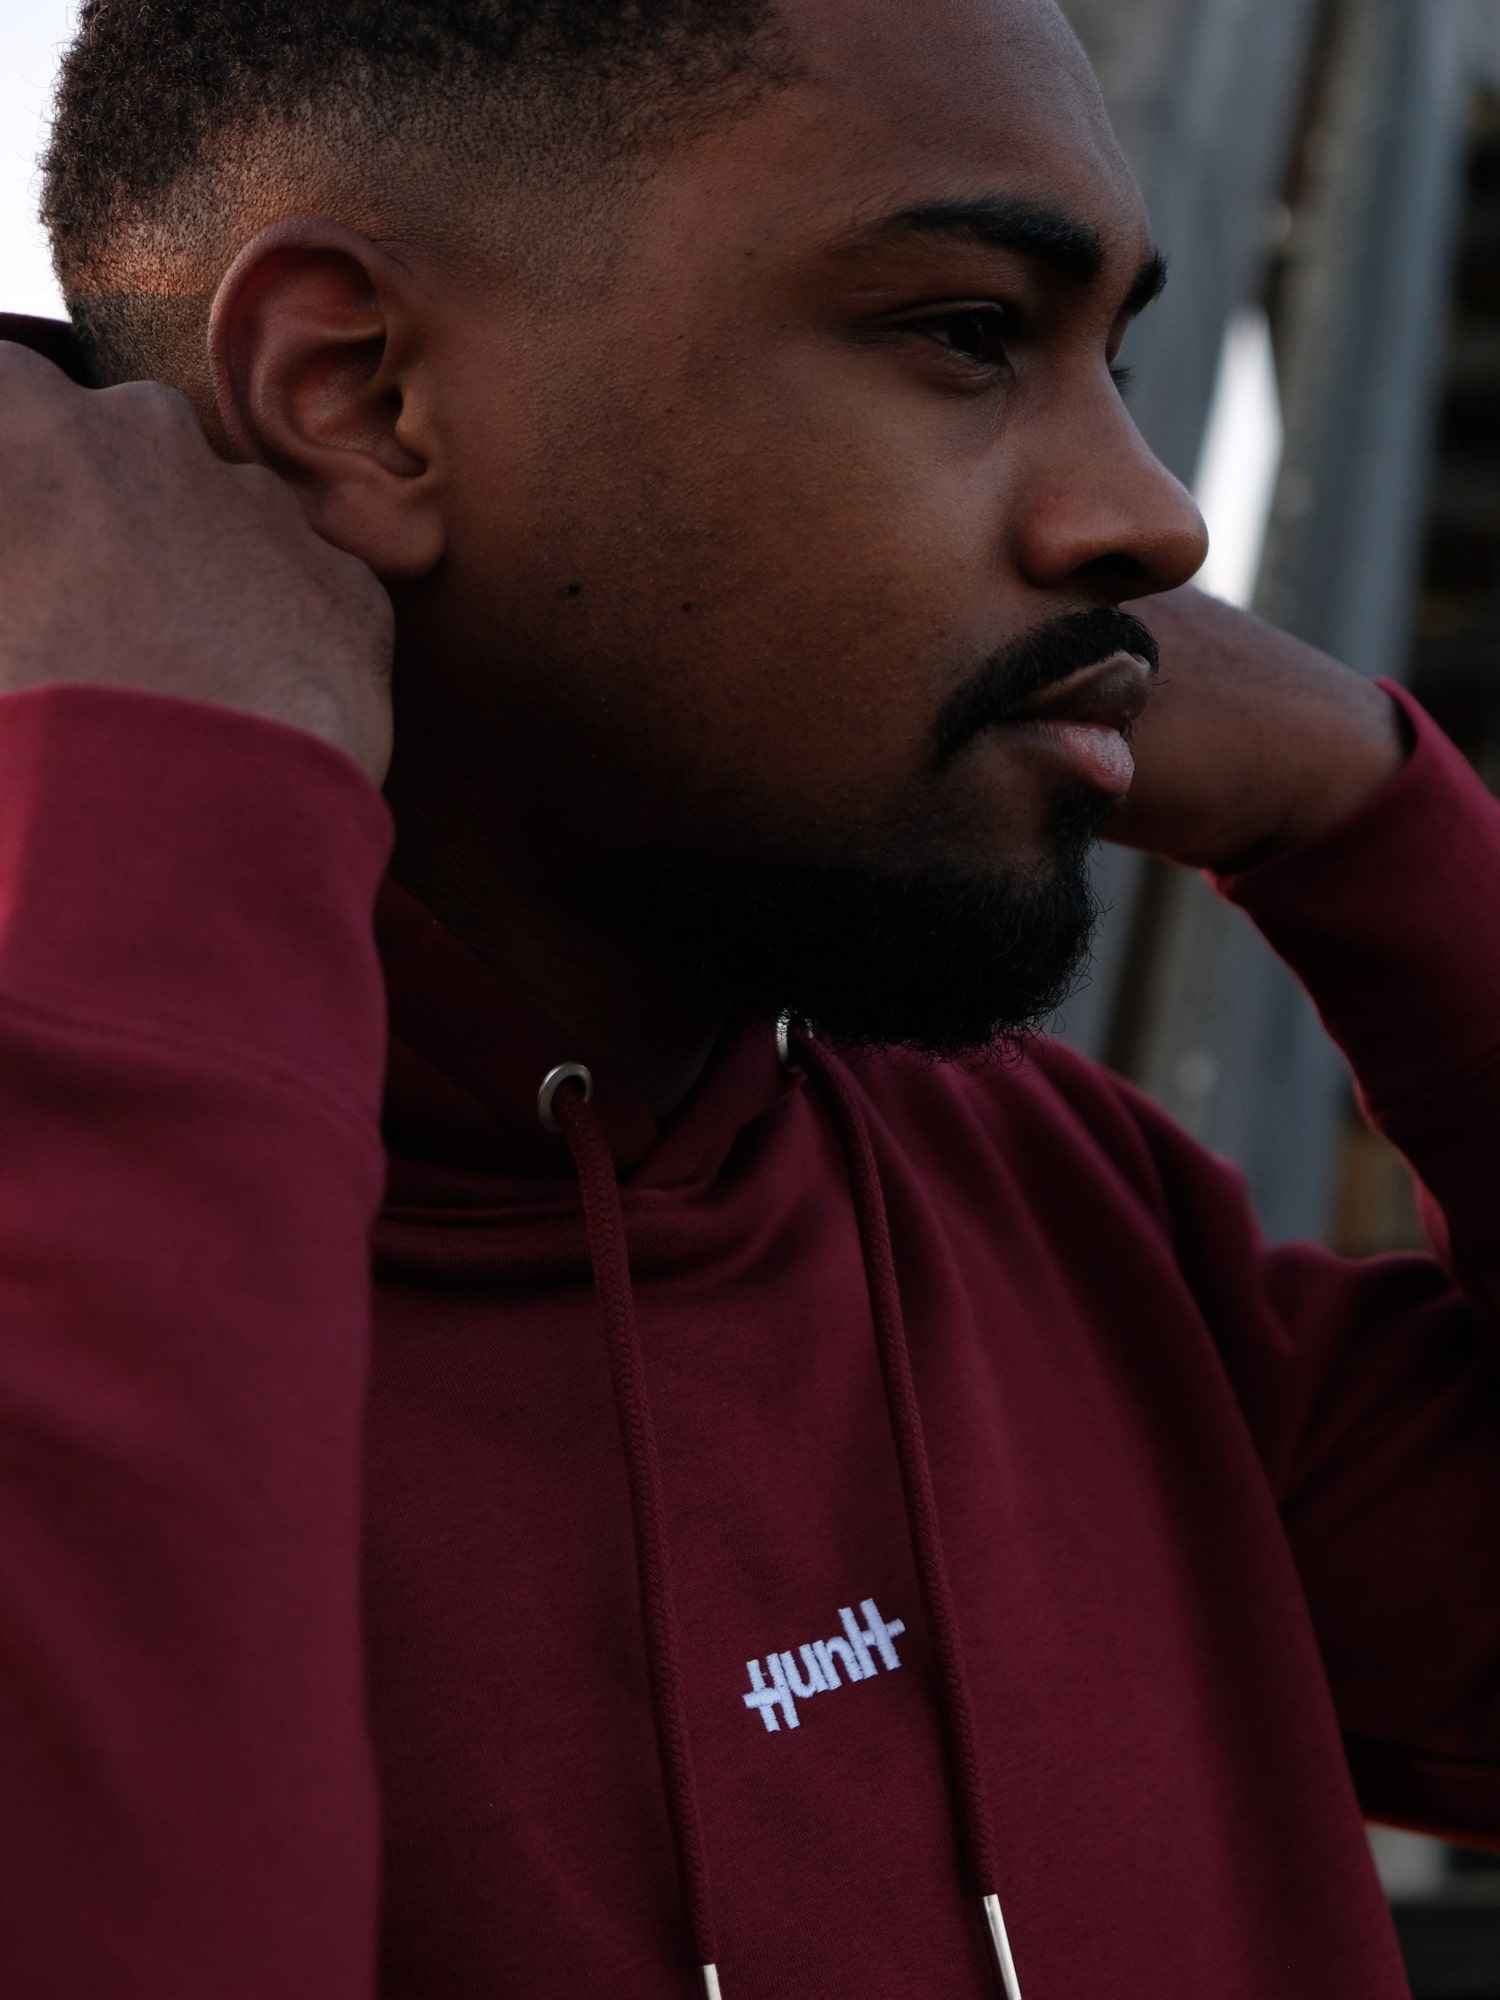 Man wearing a red hoodie with a white Huntt logo on it